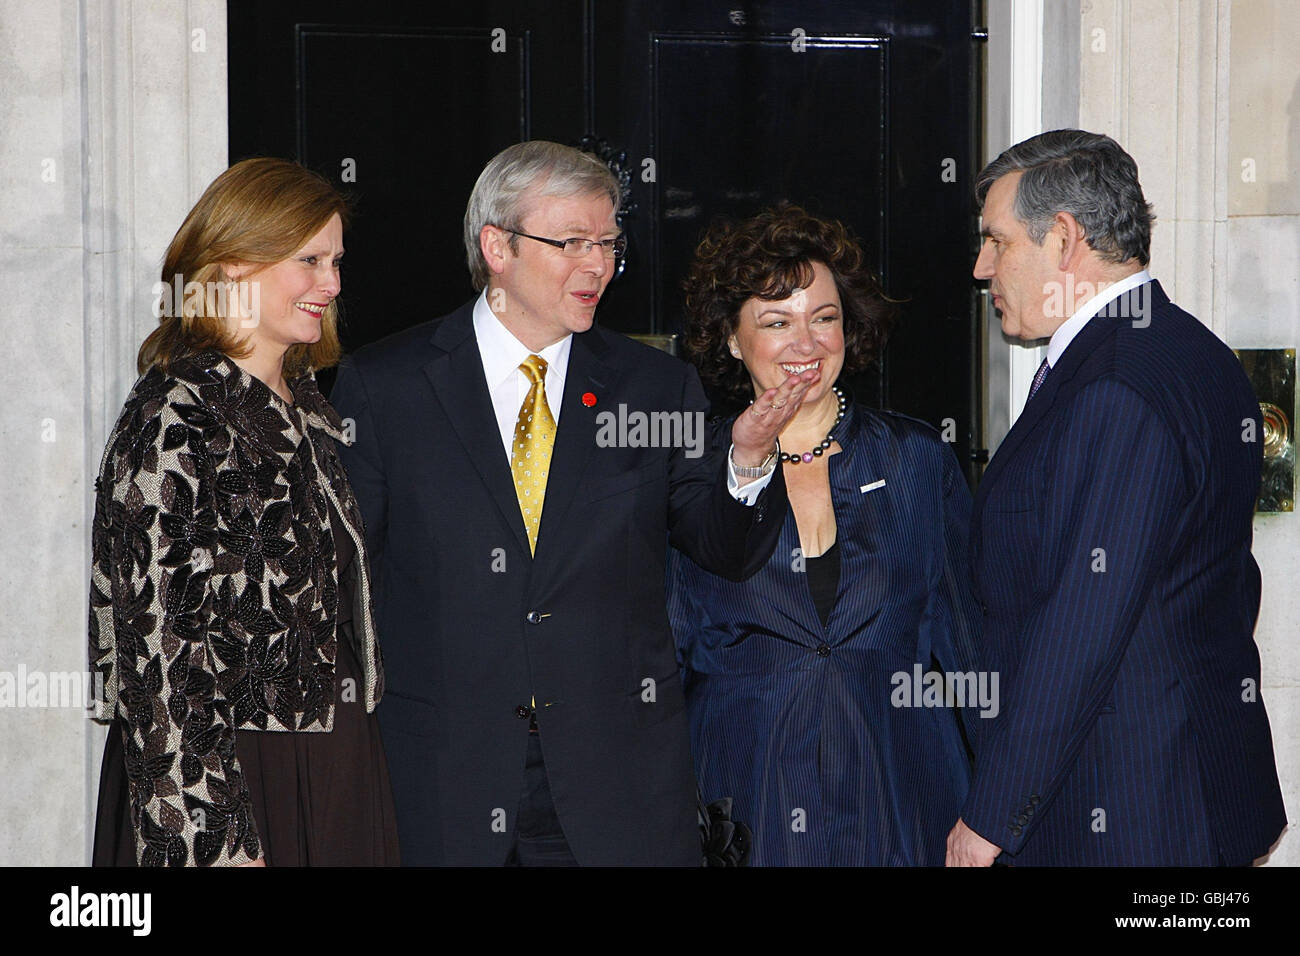 Australian Prime Minister Kevin Rudd and wife Therese Rein are greeted by Britain's Prime Minister Gordon Brown and wife Sarah as they arrive for a dinner hosted by British Prime Minister Gordon Brown at 10, Downing Street, of the eve of the G20 summit in London. Stock Photo